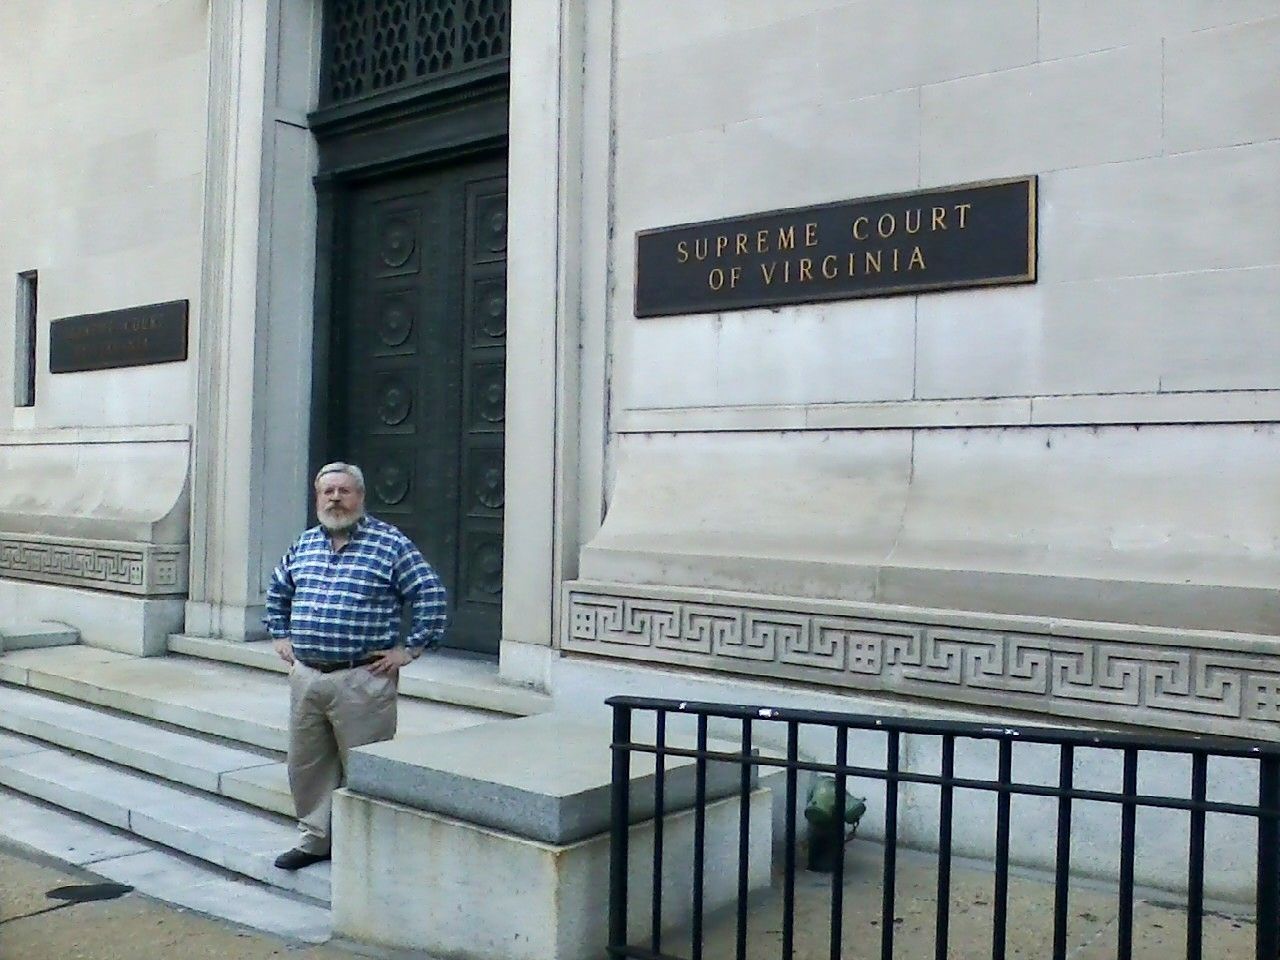 The day before, we took a little walk around Commonwealth Park, and Hubby posed on the steps of the court building. 